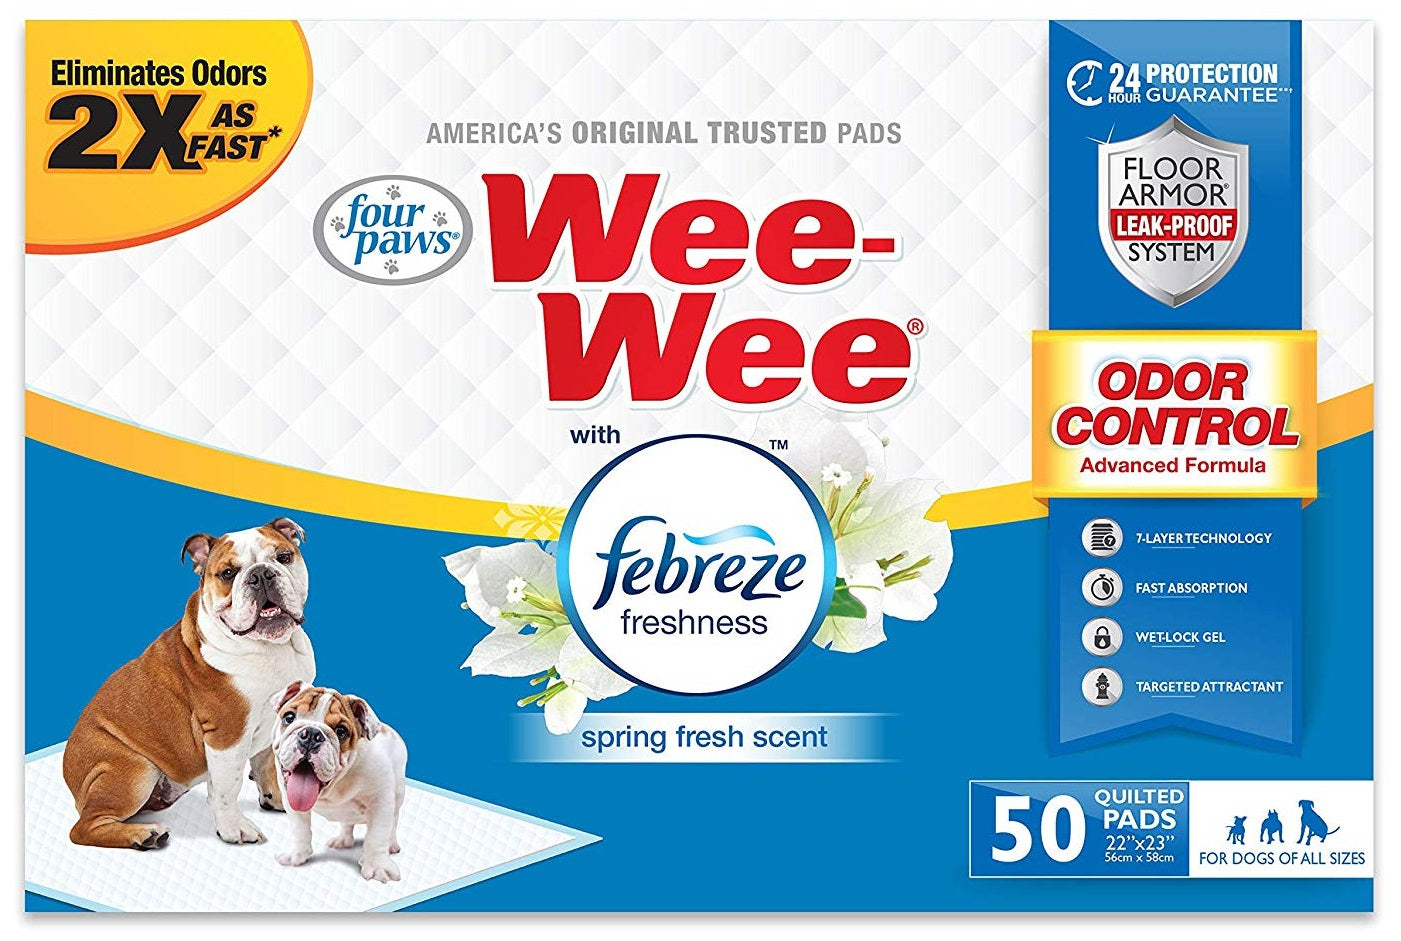 Four Paws Wee Wee Odor Control Pads with Fabreze Freshness